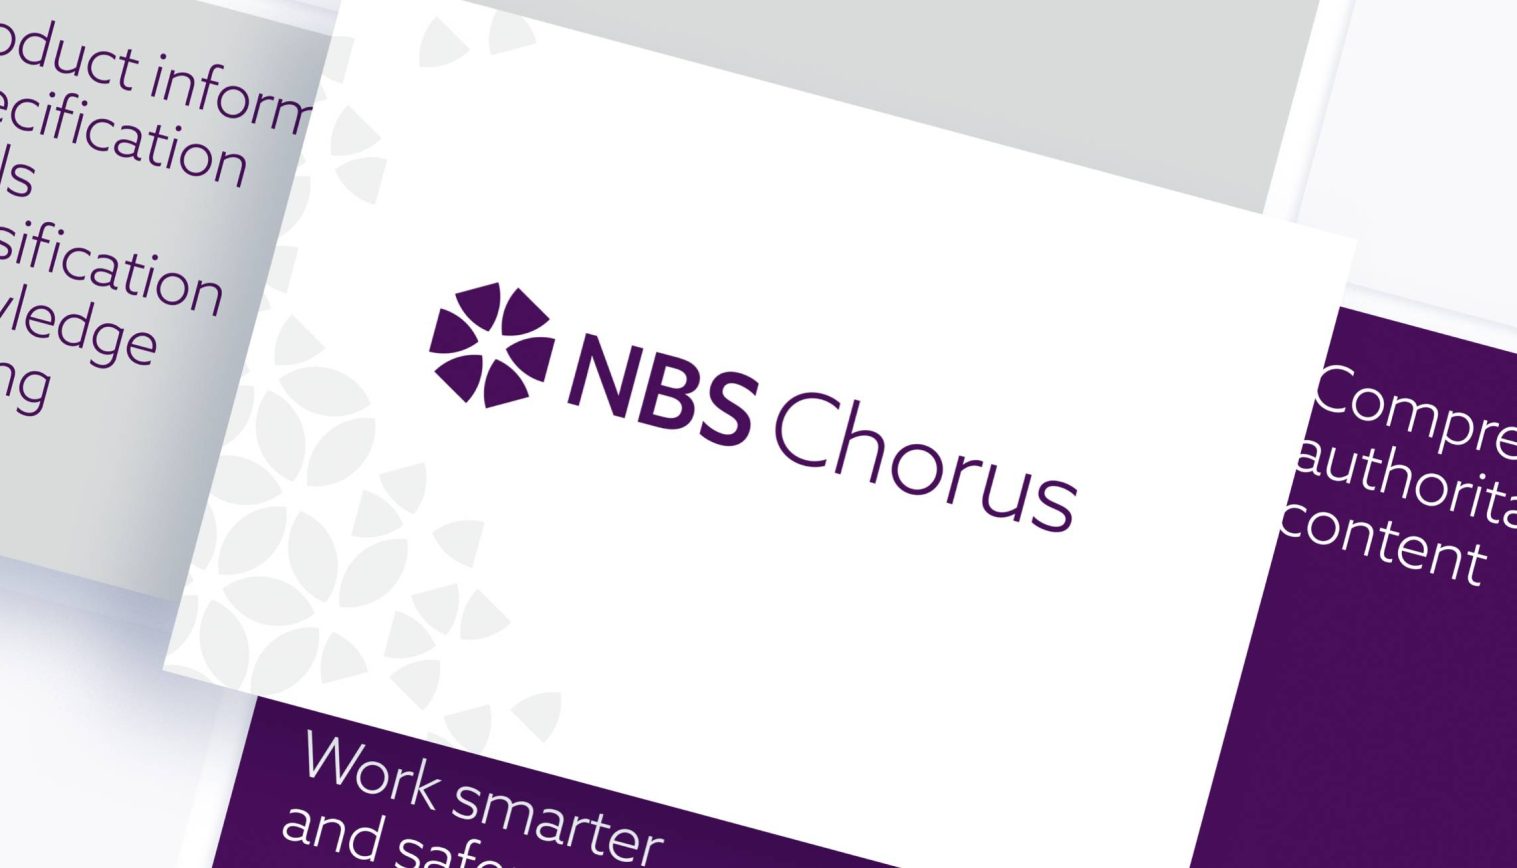 Let’s Collaborate on NBS Chorus